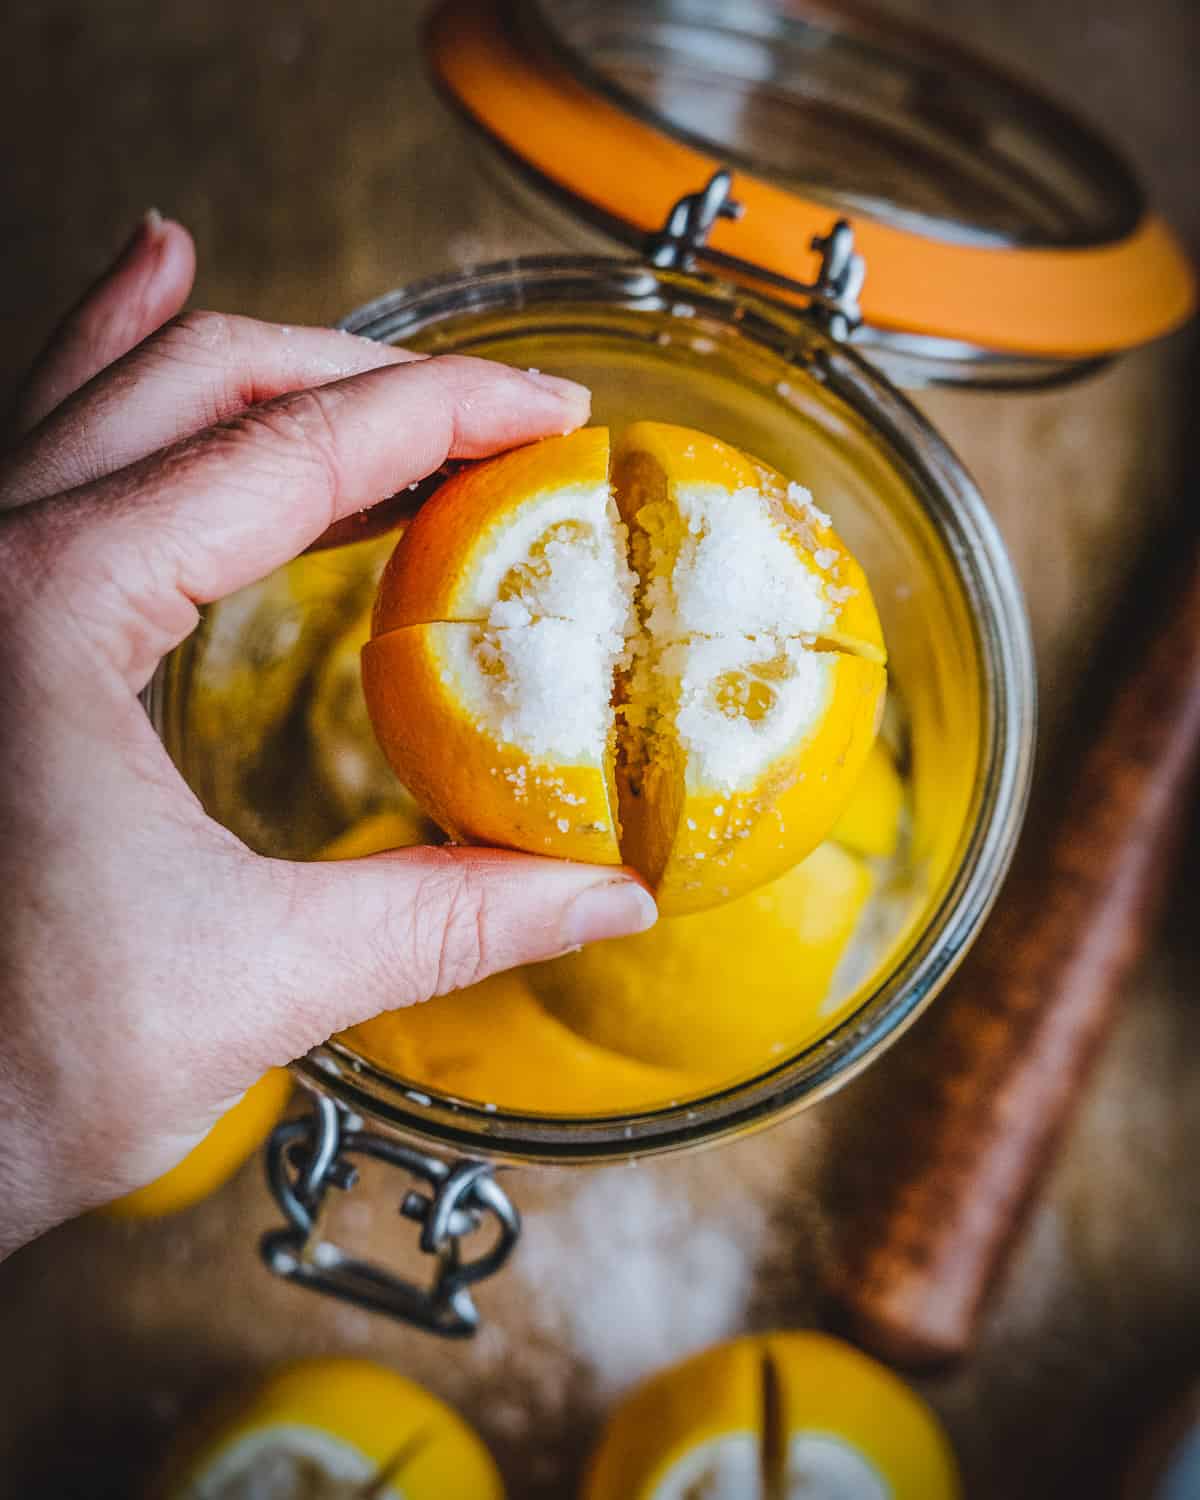 A top view of an open jar of lemons, with a hand holding a quartered lemon sprinkled with salt in the foreground. The background has a wood cutting board, several other lemons, and a wooden muddler. 